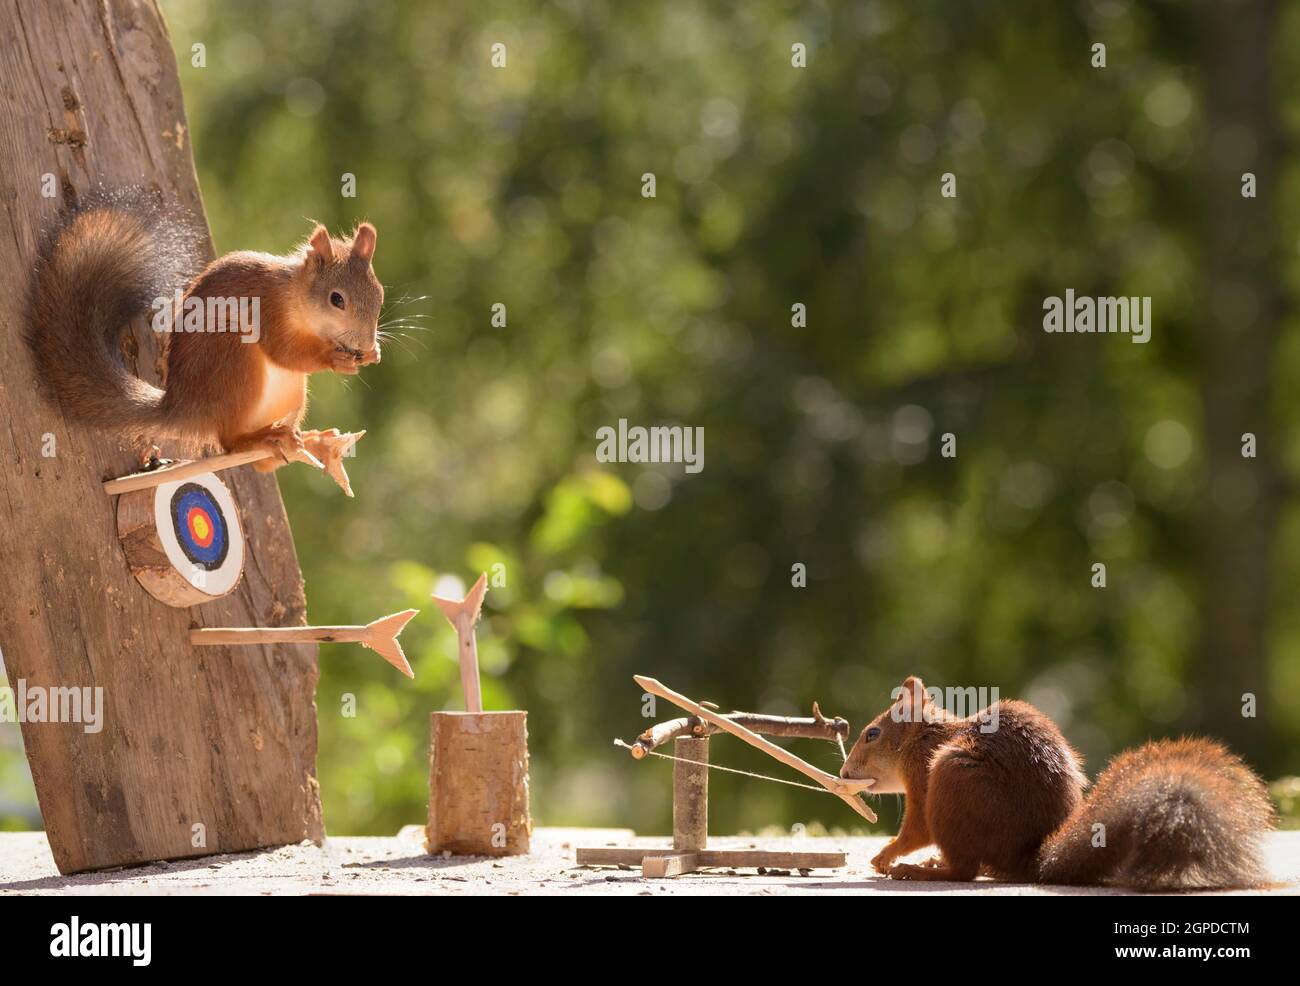 Search Squirrel Catapults